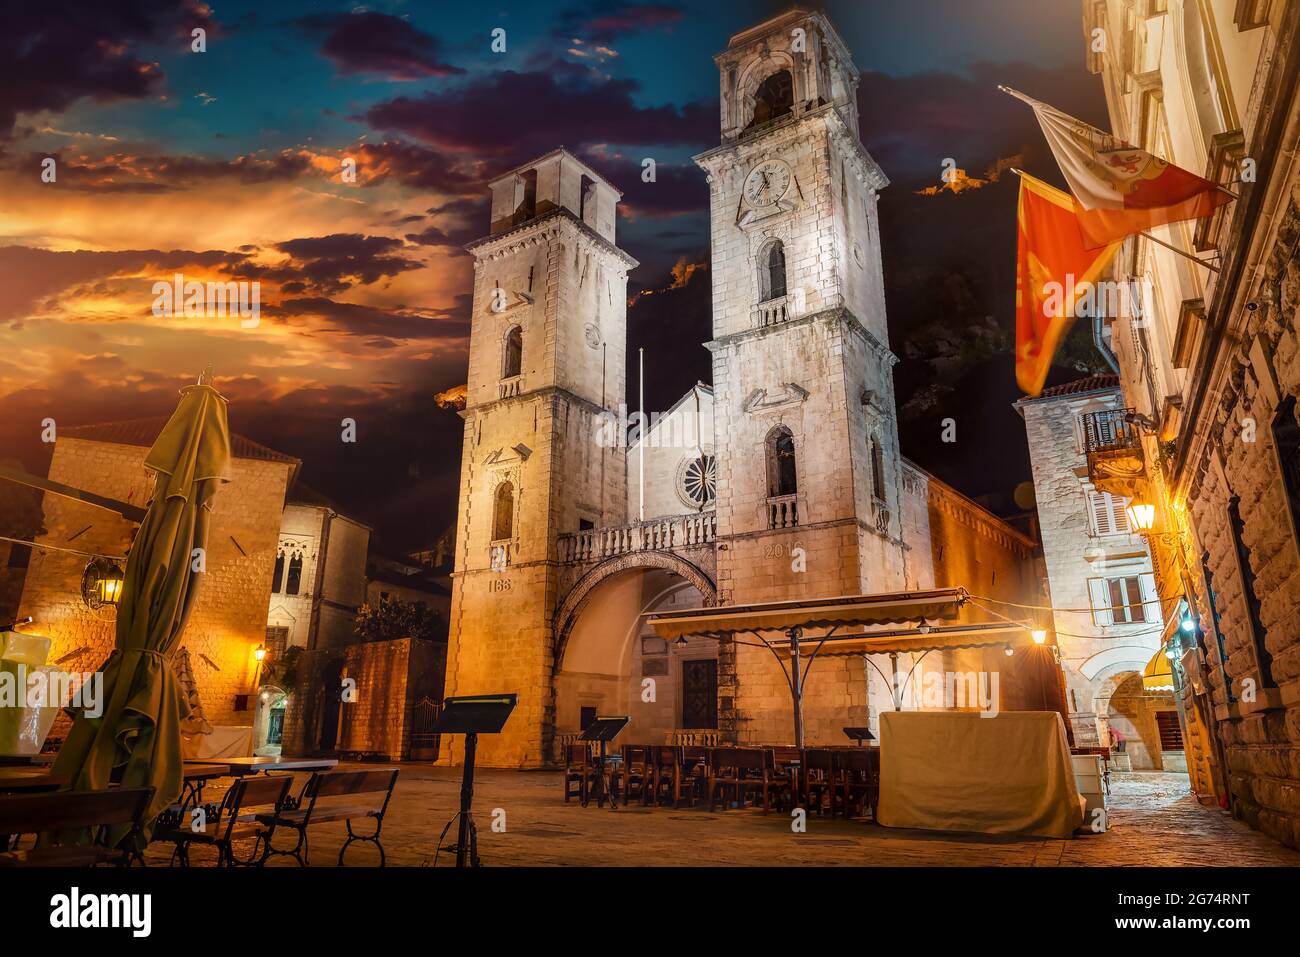 Saint Tryphon Church in the Old Town of Kotor at night Stock Photo